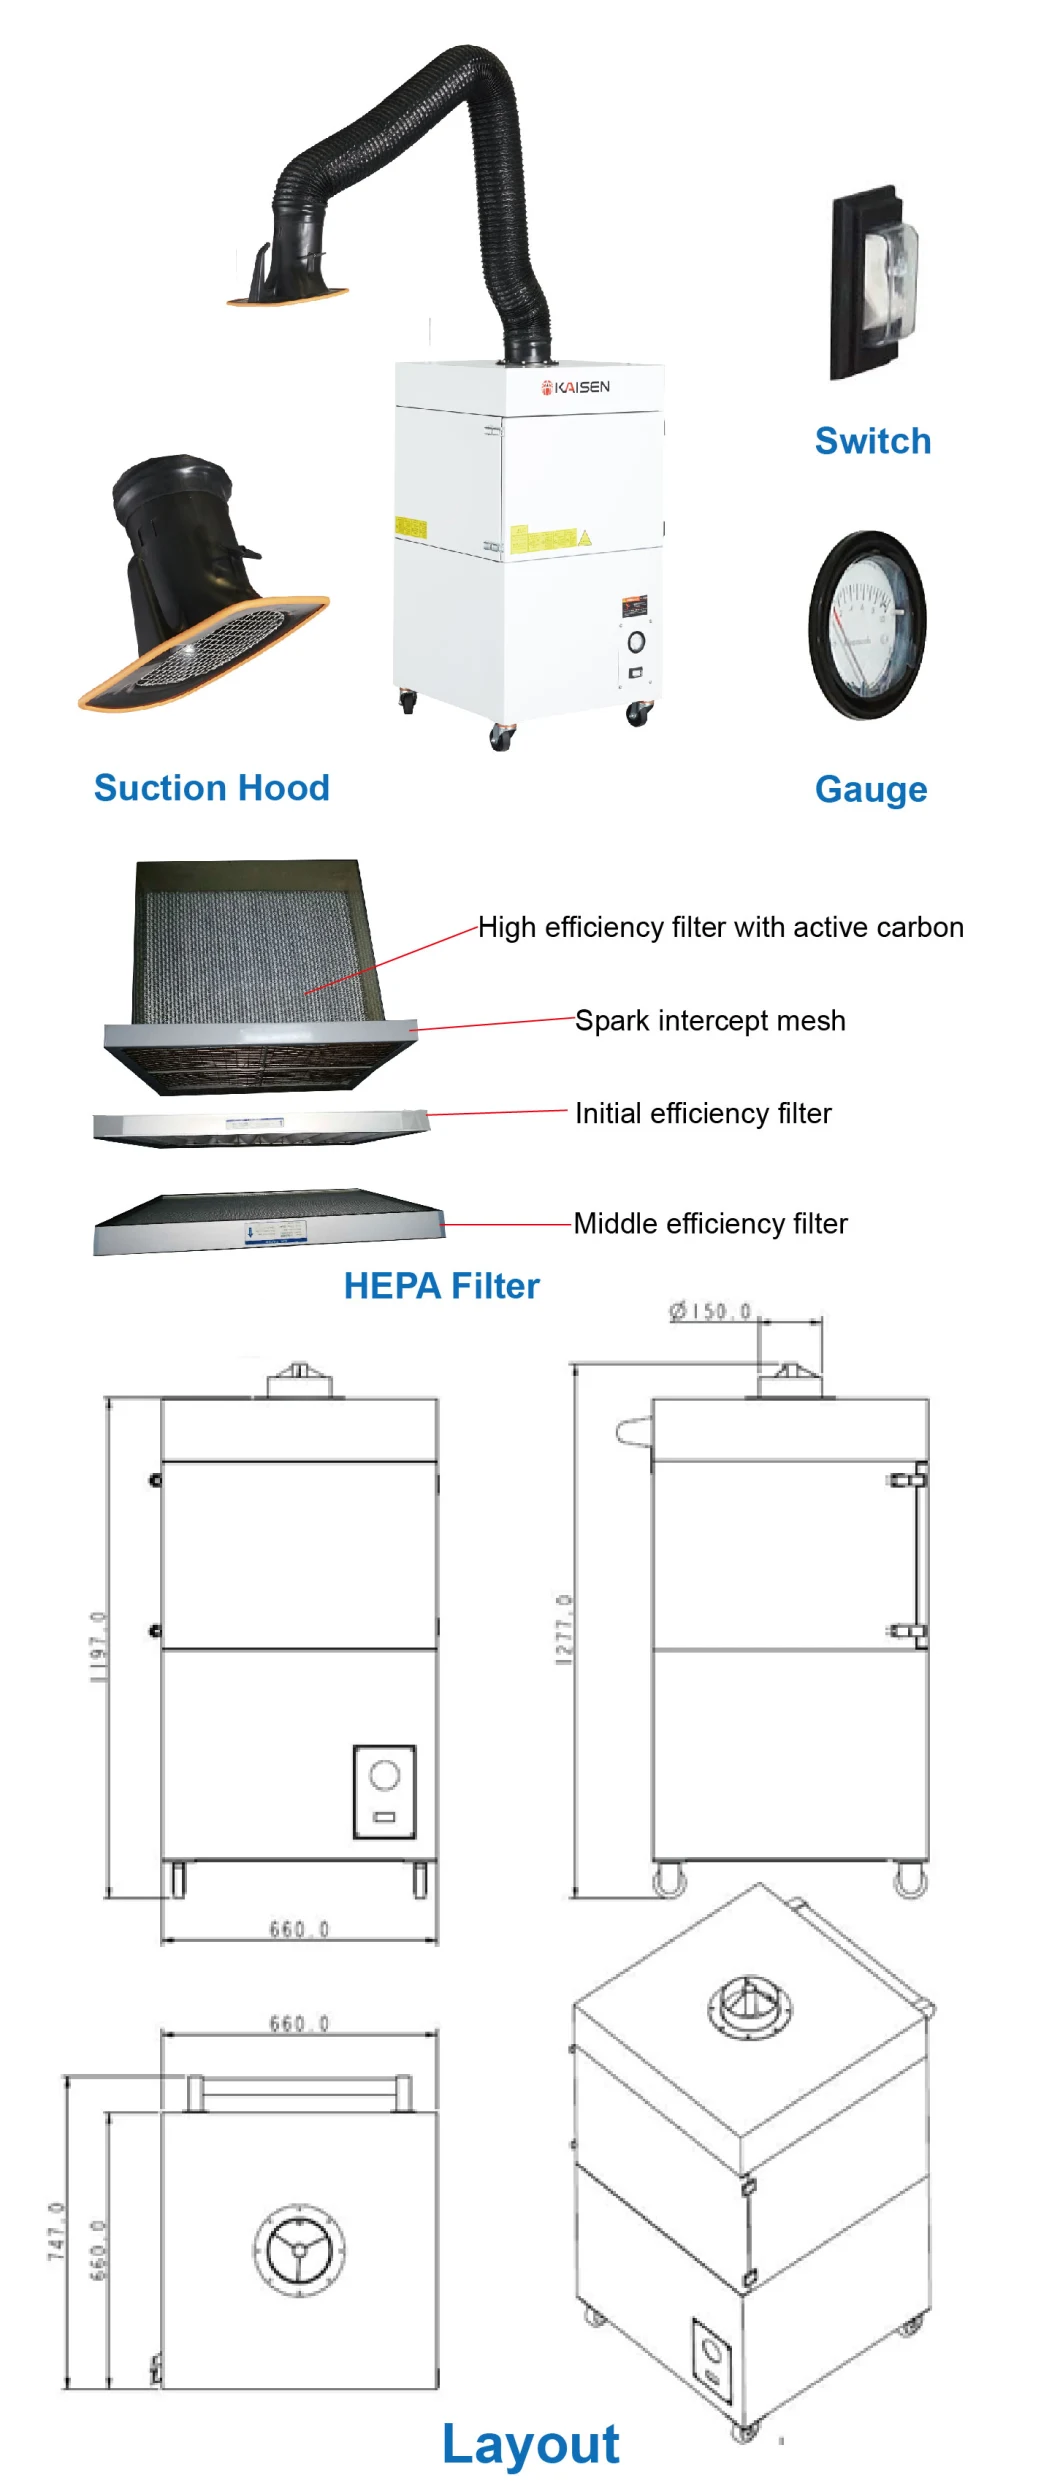 HEPA Filter Active Carbon Filter High Efficiency Filter Dust Collector Air Purifier Smoke Filtration